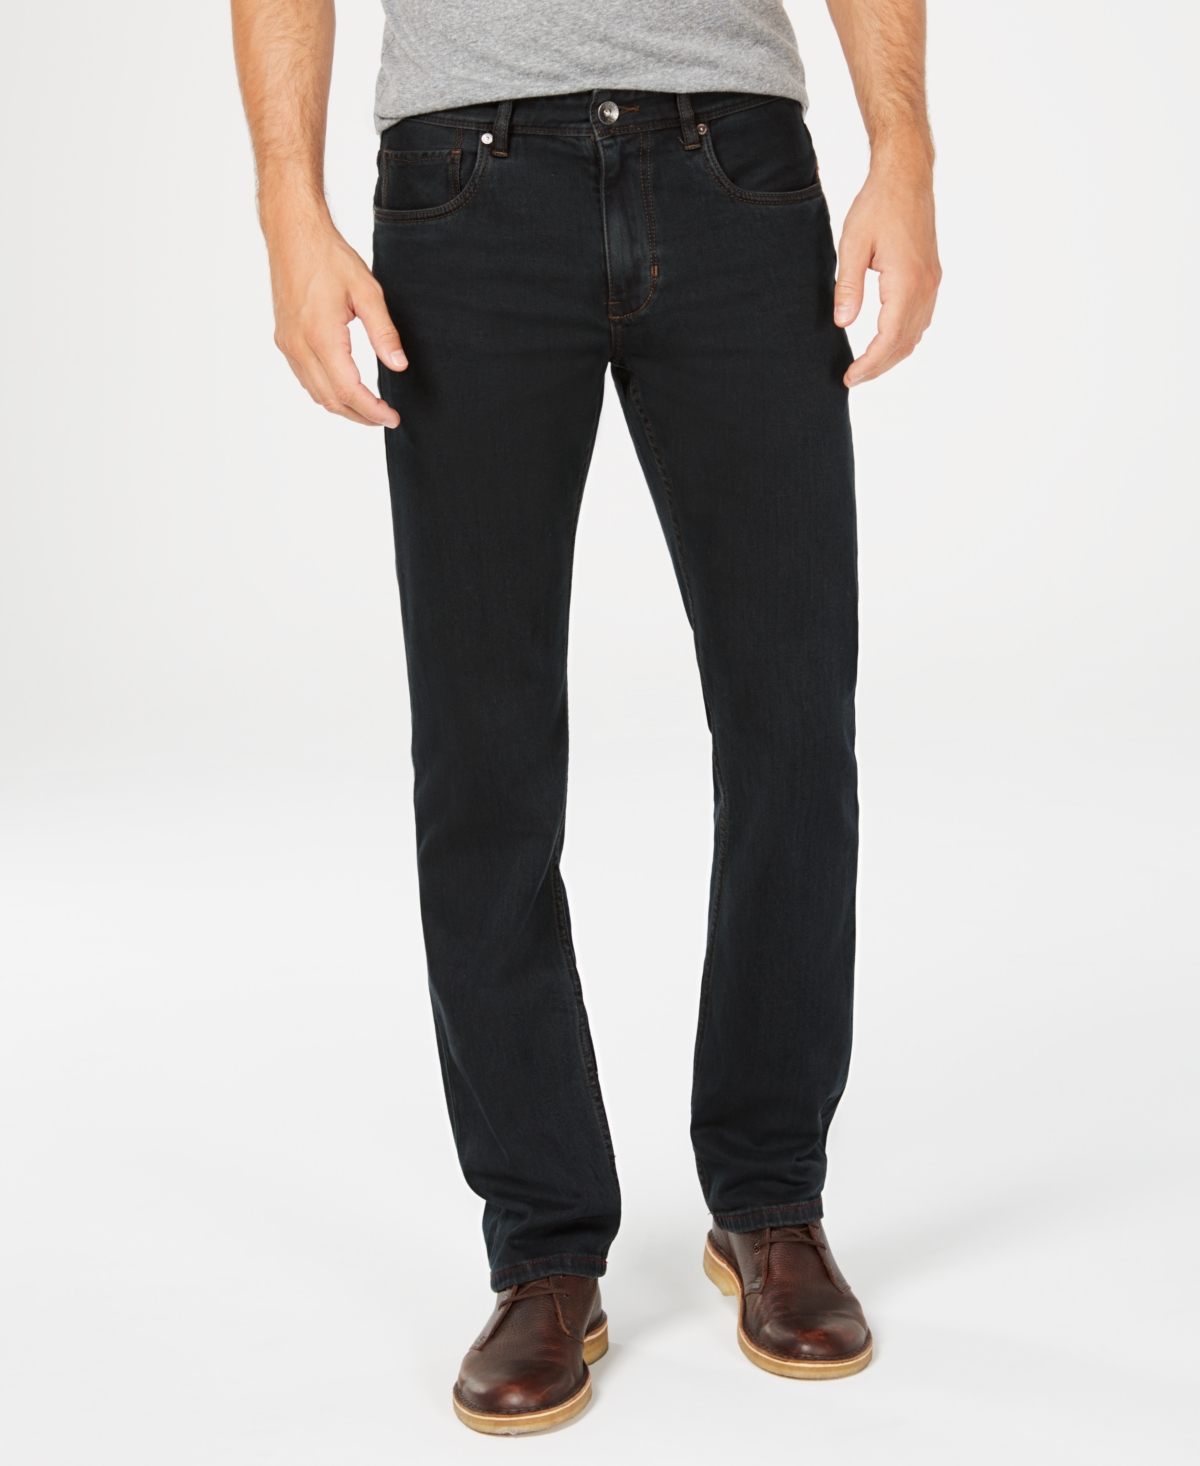 UPC 719260422421 product image for Tommy Bahama Men's Antigua Cove Authentic Fit Jeans | upcitemdb.com